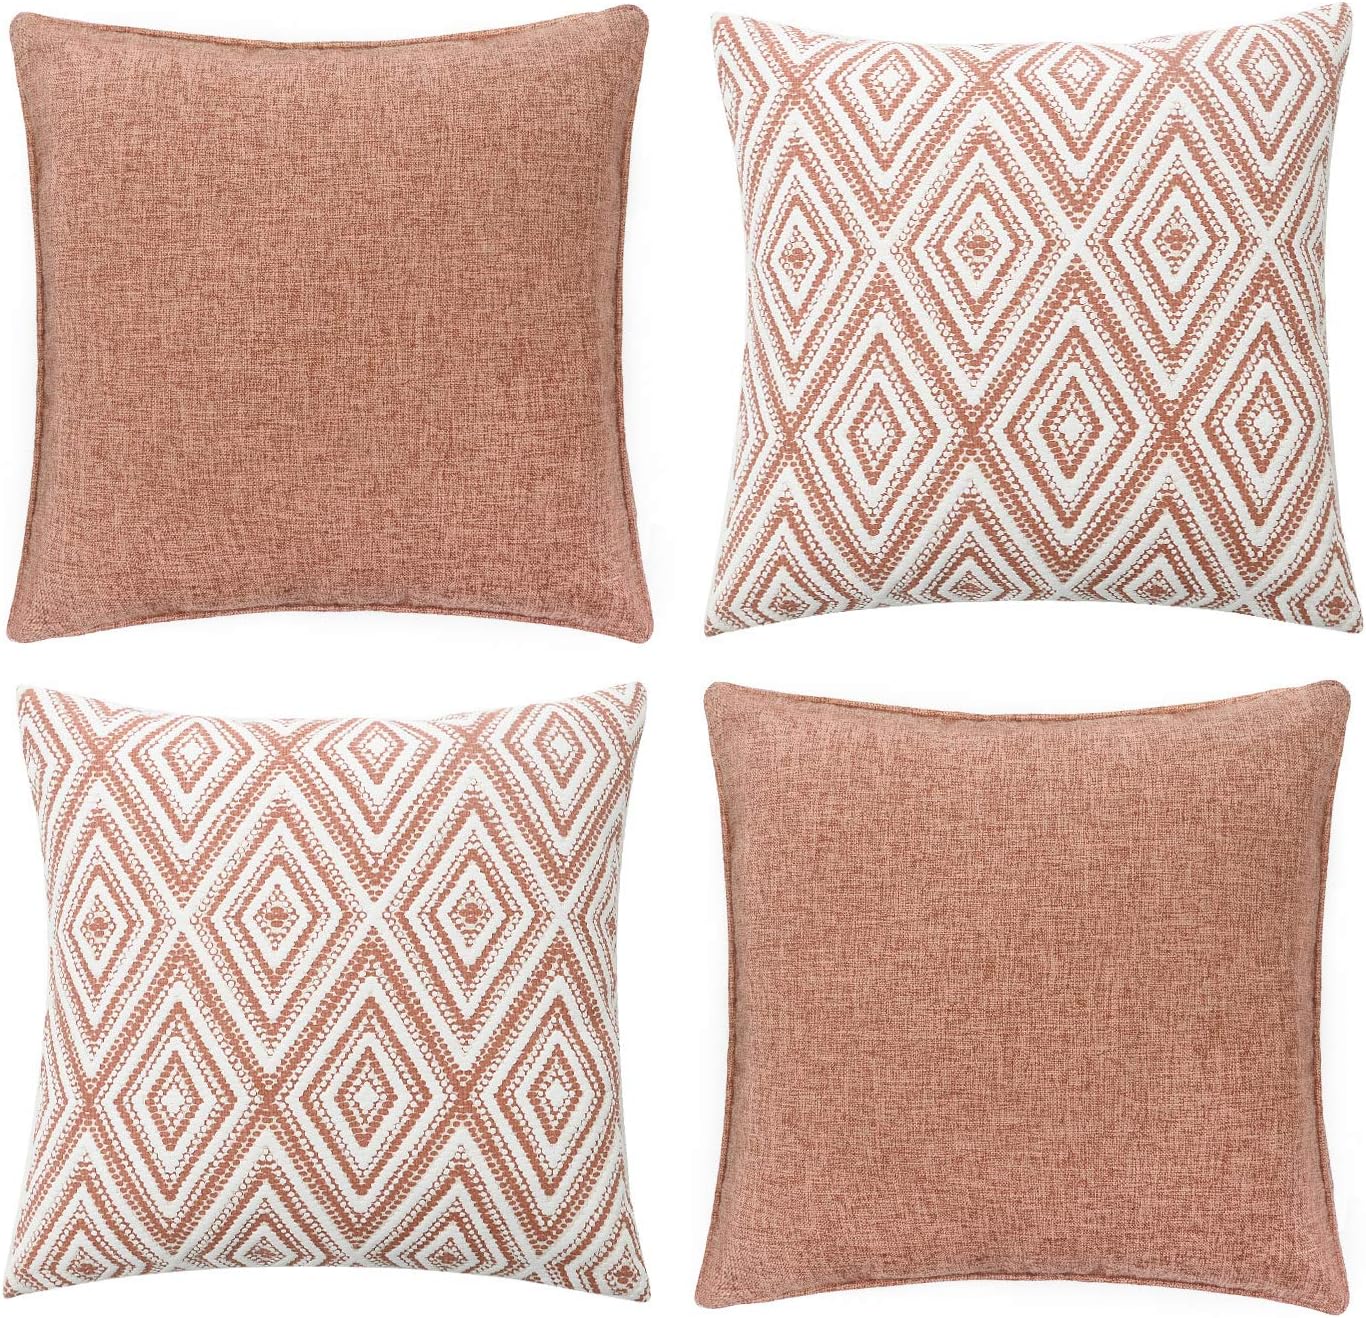 HPUK Decorative Throw Pillow Covers Set of 4 Geometric Design Linen Cushion Cover for Couch Sofa Living Room, 18x18 inches, Coral